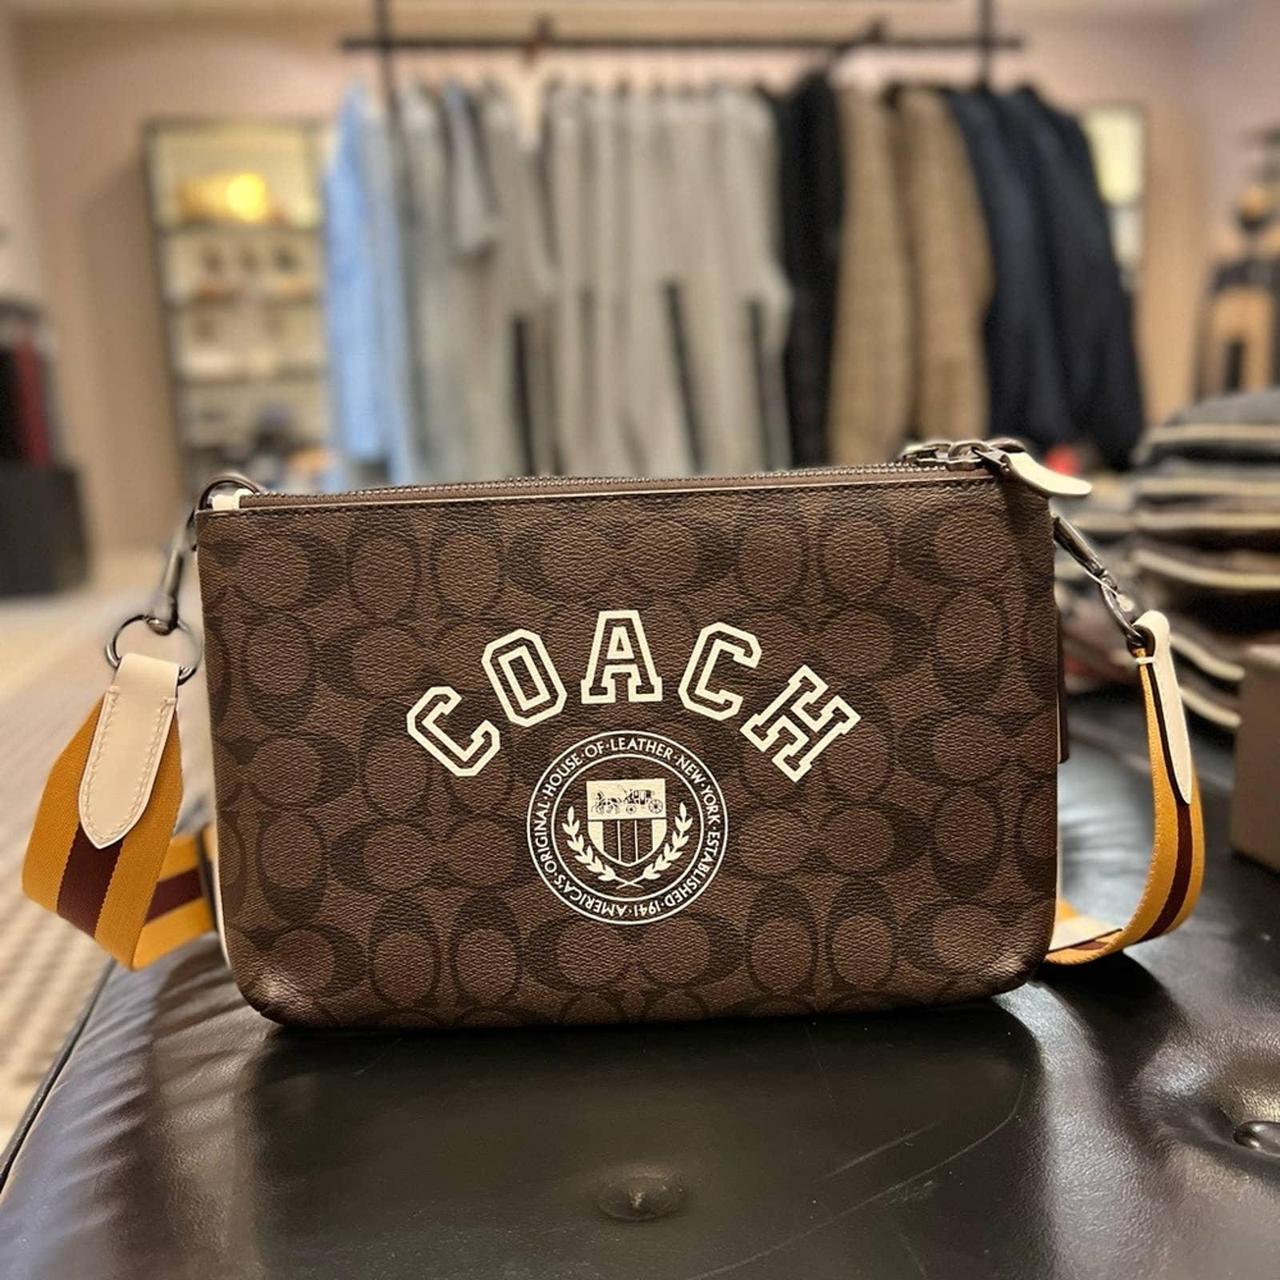 Coach Women's Brown and Yellow Bag